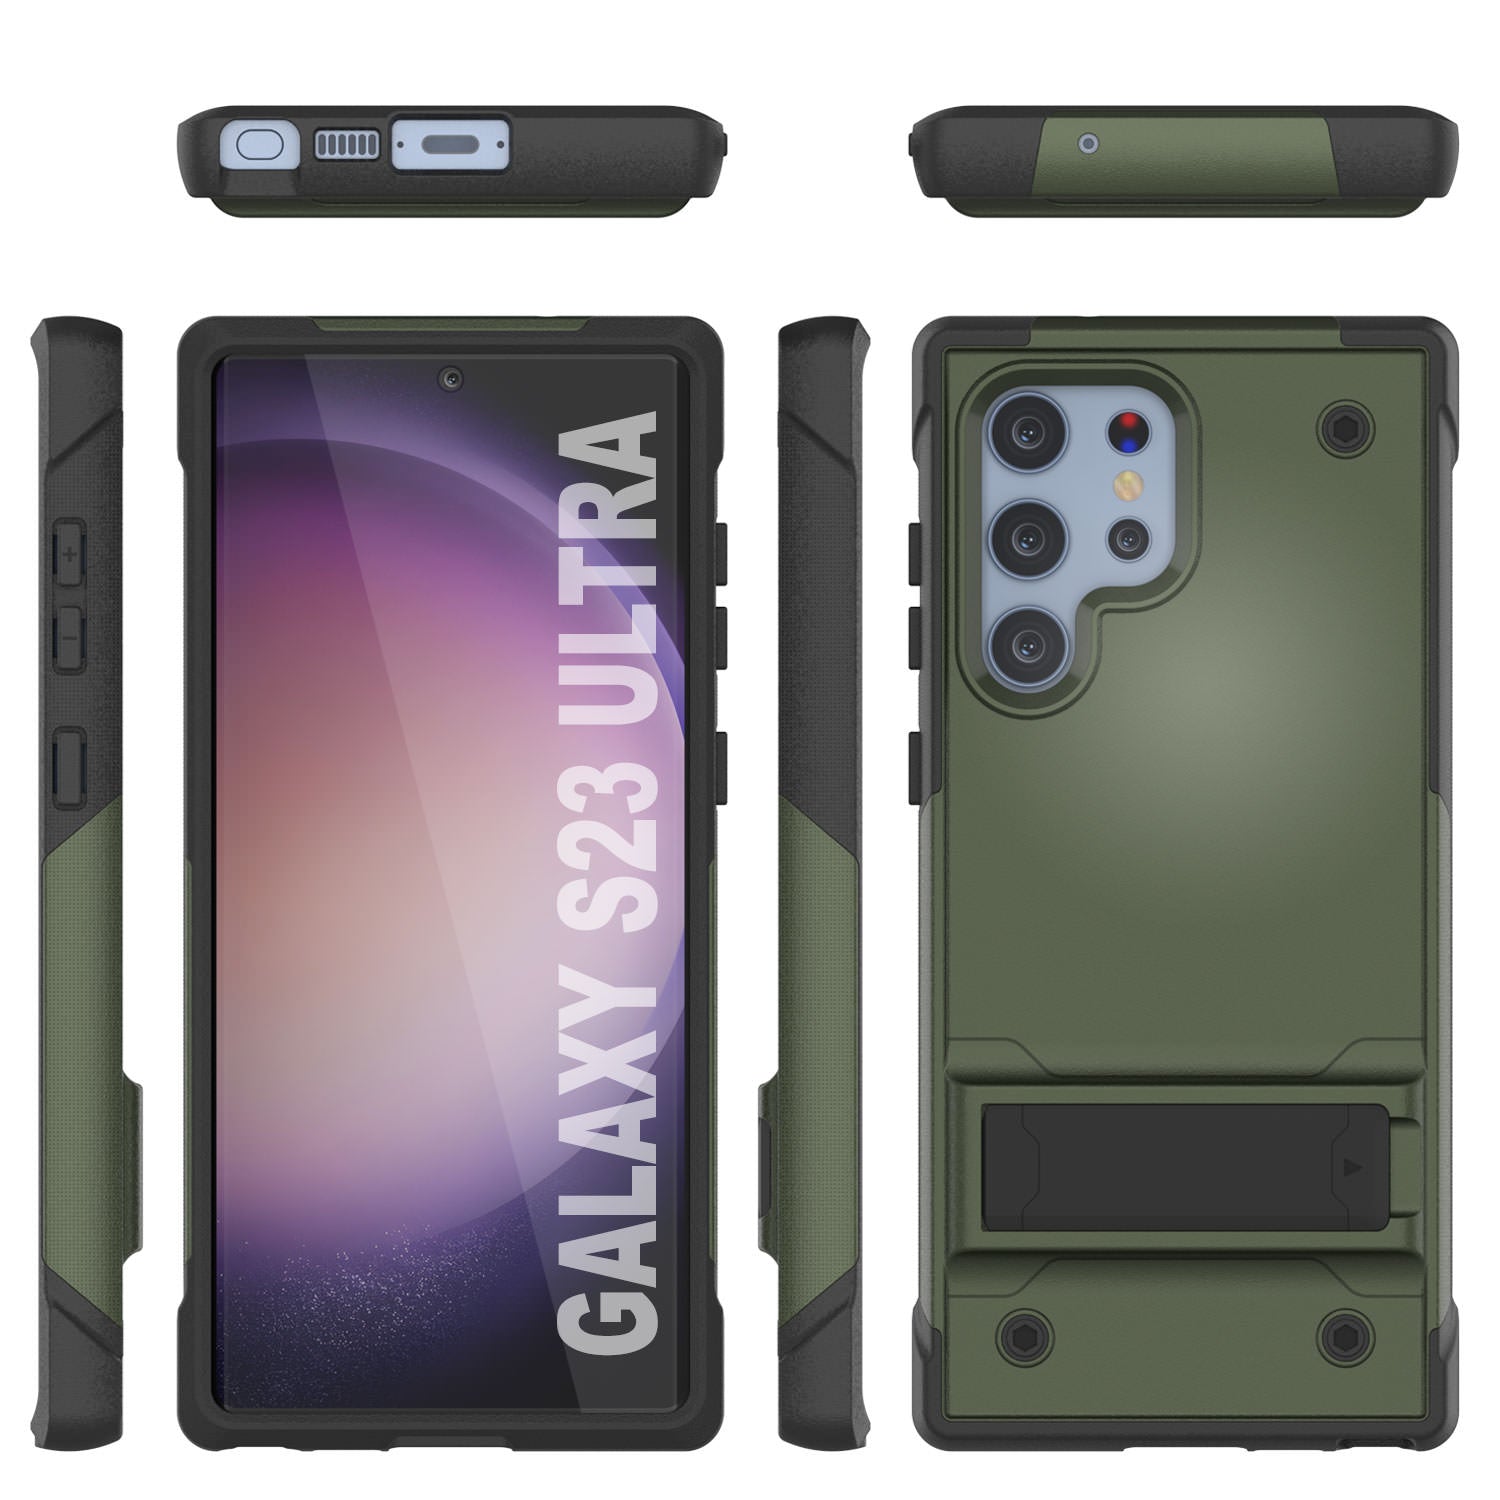 Punkcase Galaxy S23 Ultra Case [Reliance Series] Protective Hybrid Military Grade Cover W/Built-in Kickstand [Army-Green-Black]